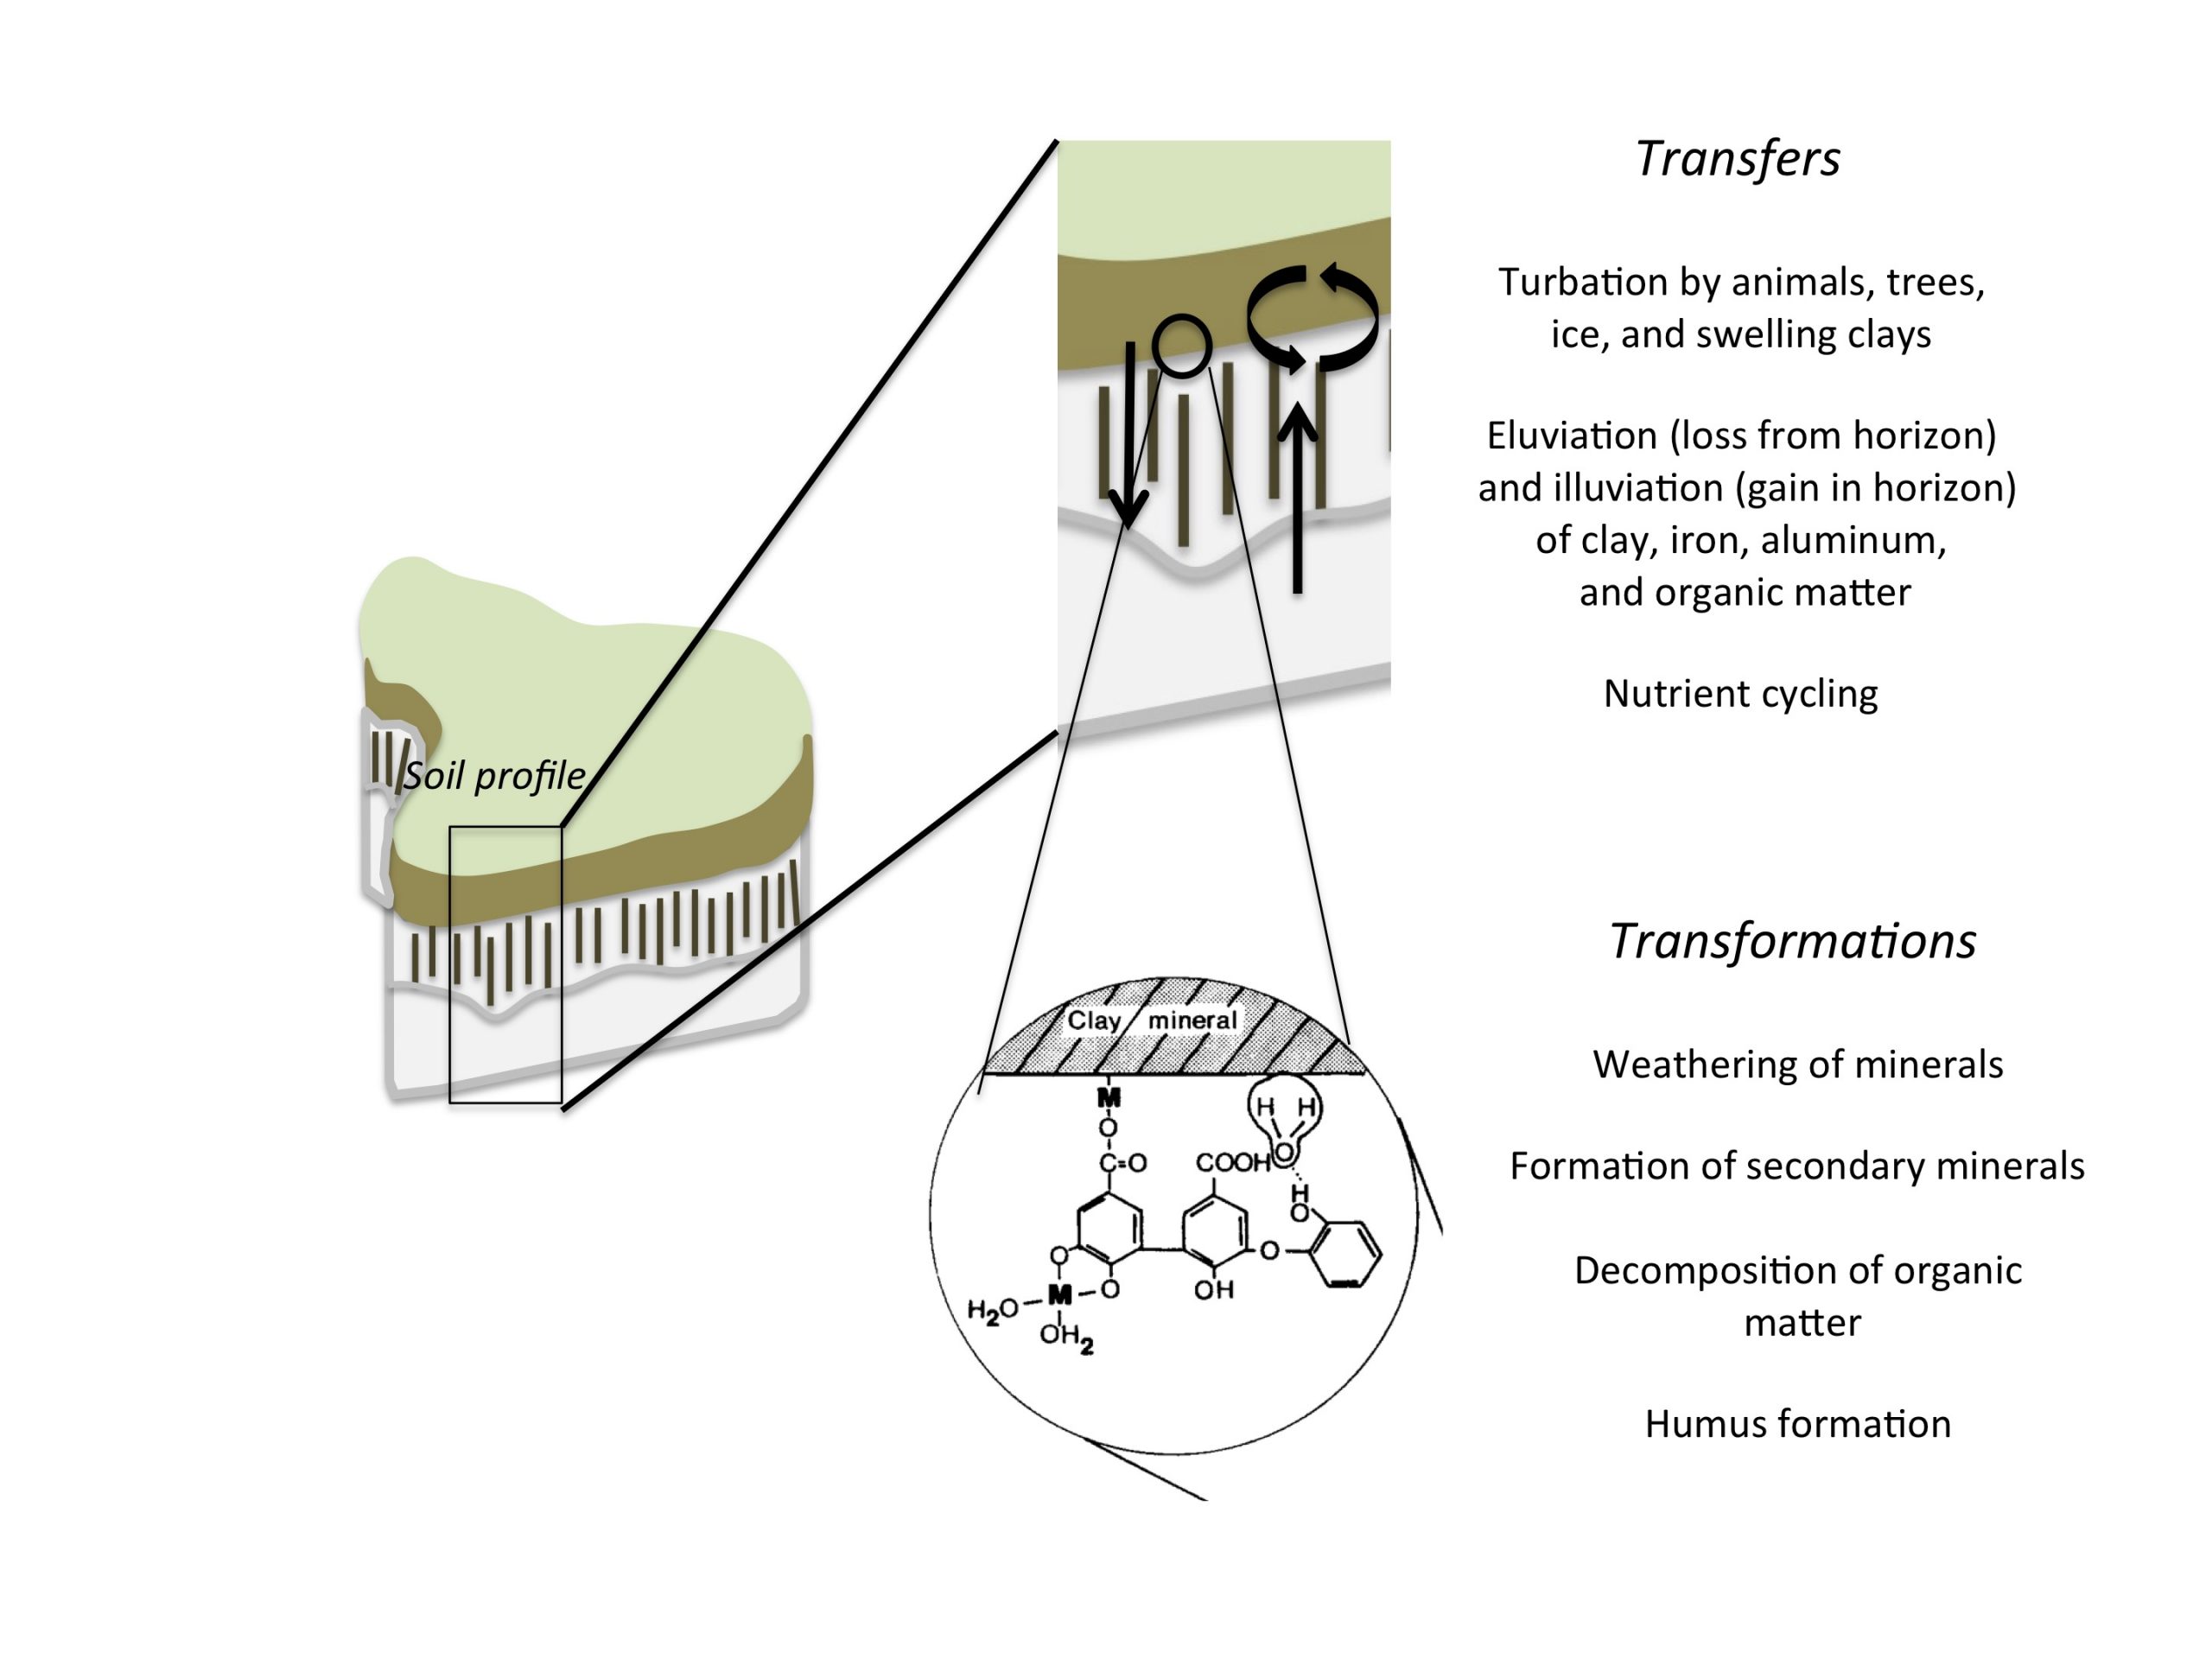 Figure-2.9-Transfers-and-Transformations-scaled.jpg